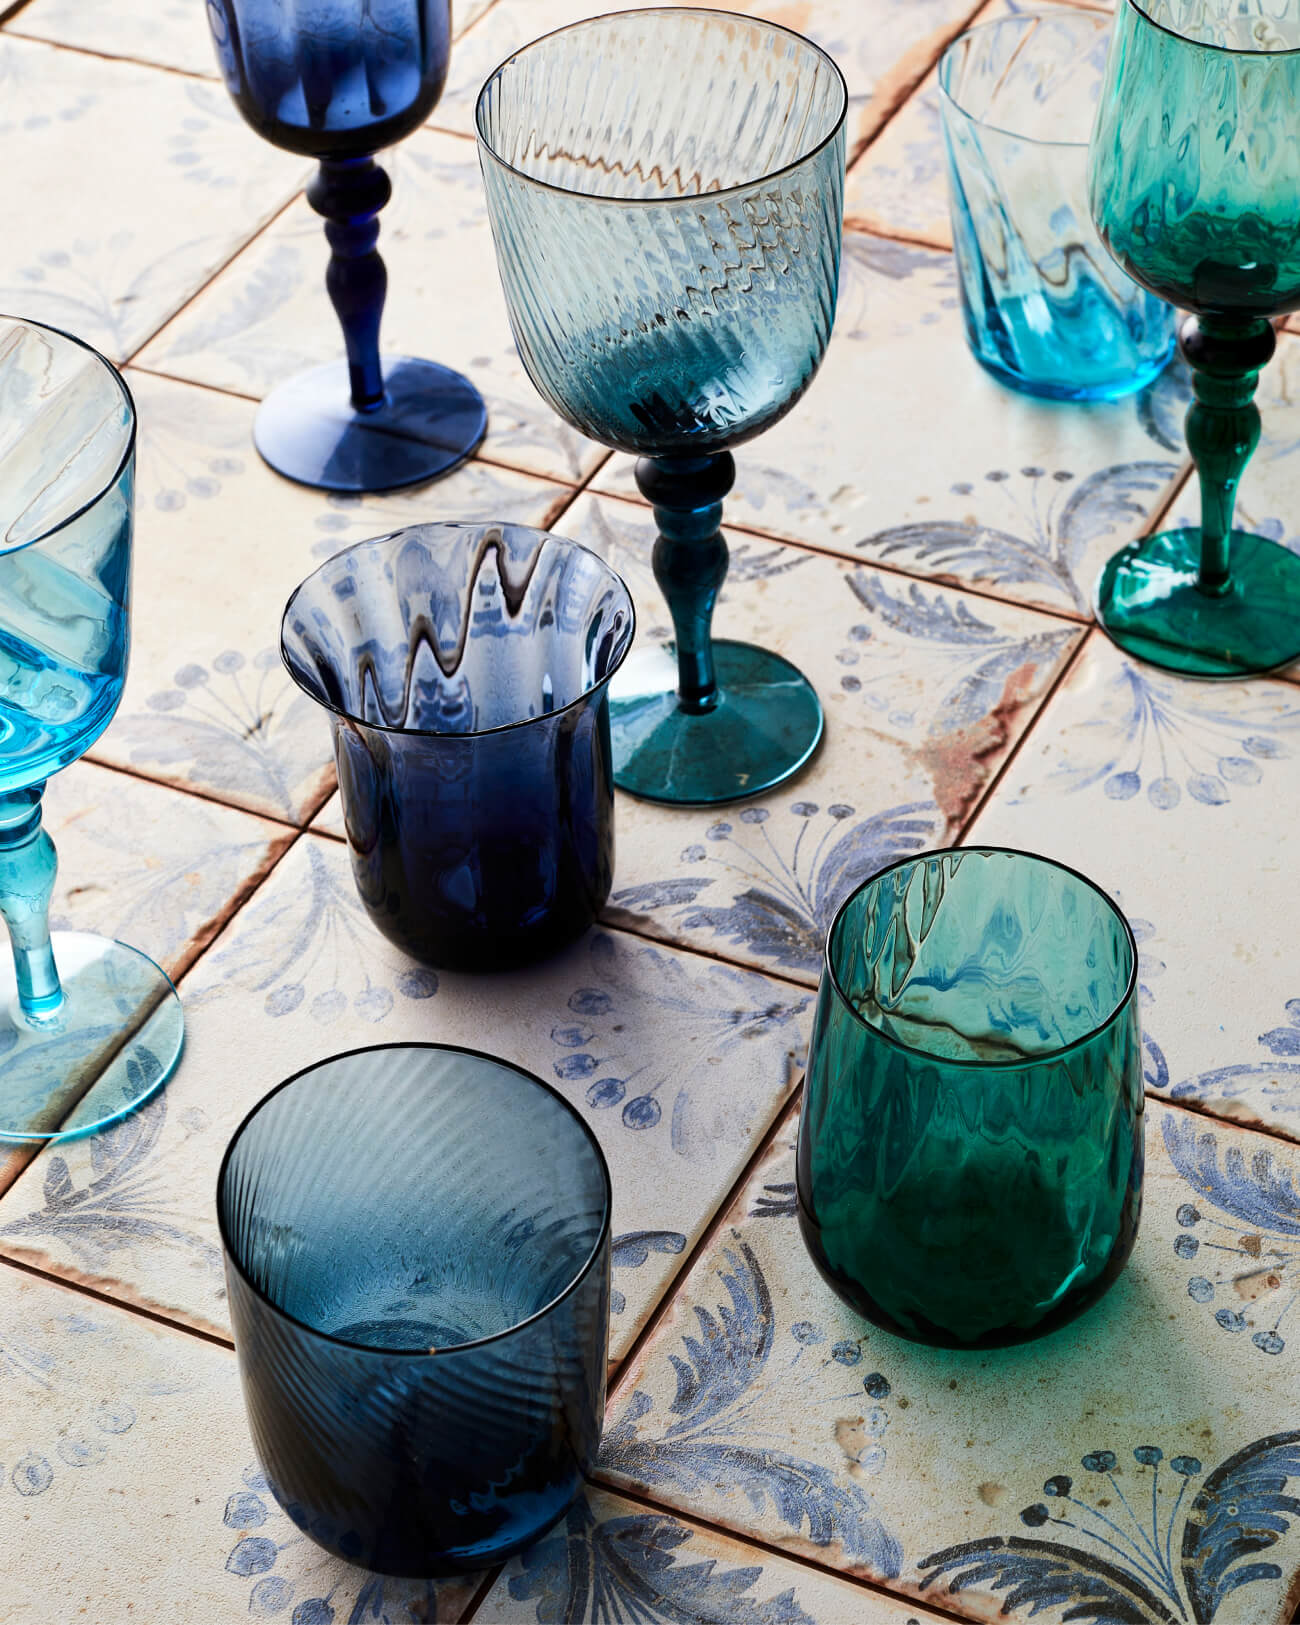 Selection of beautiful ornate mix and match blue glassware photographed on tiles